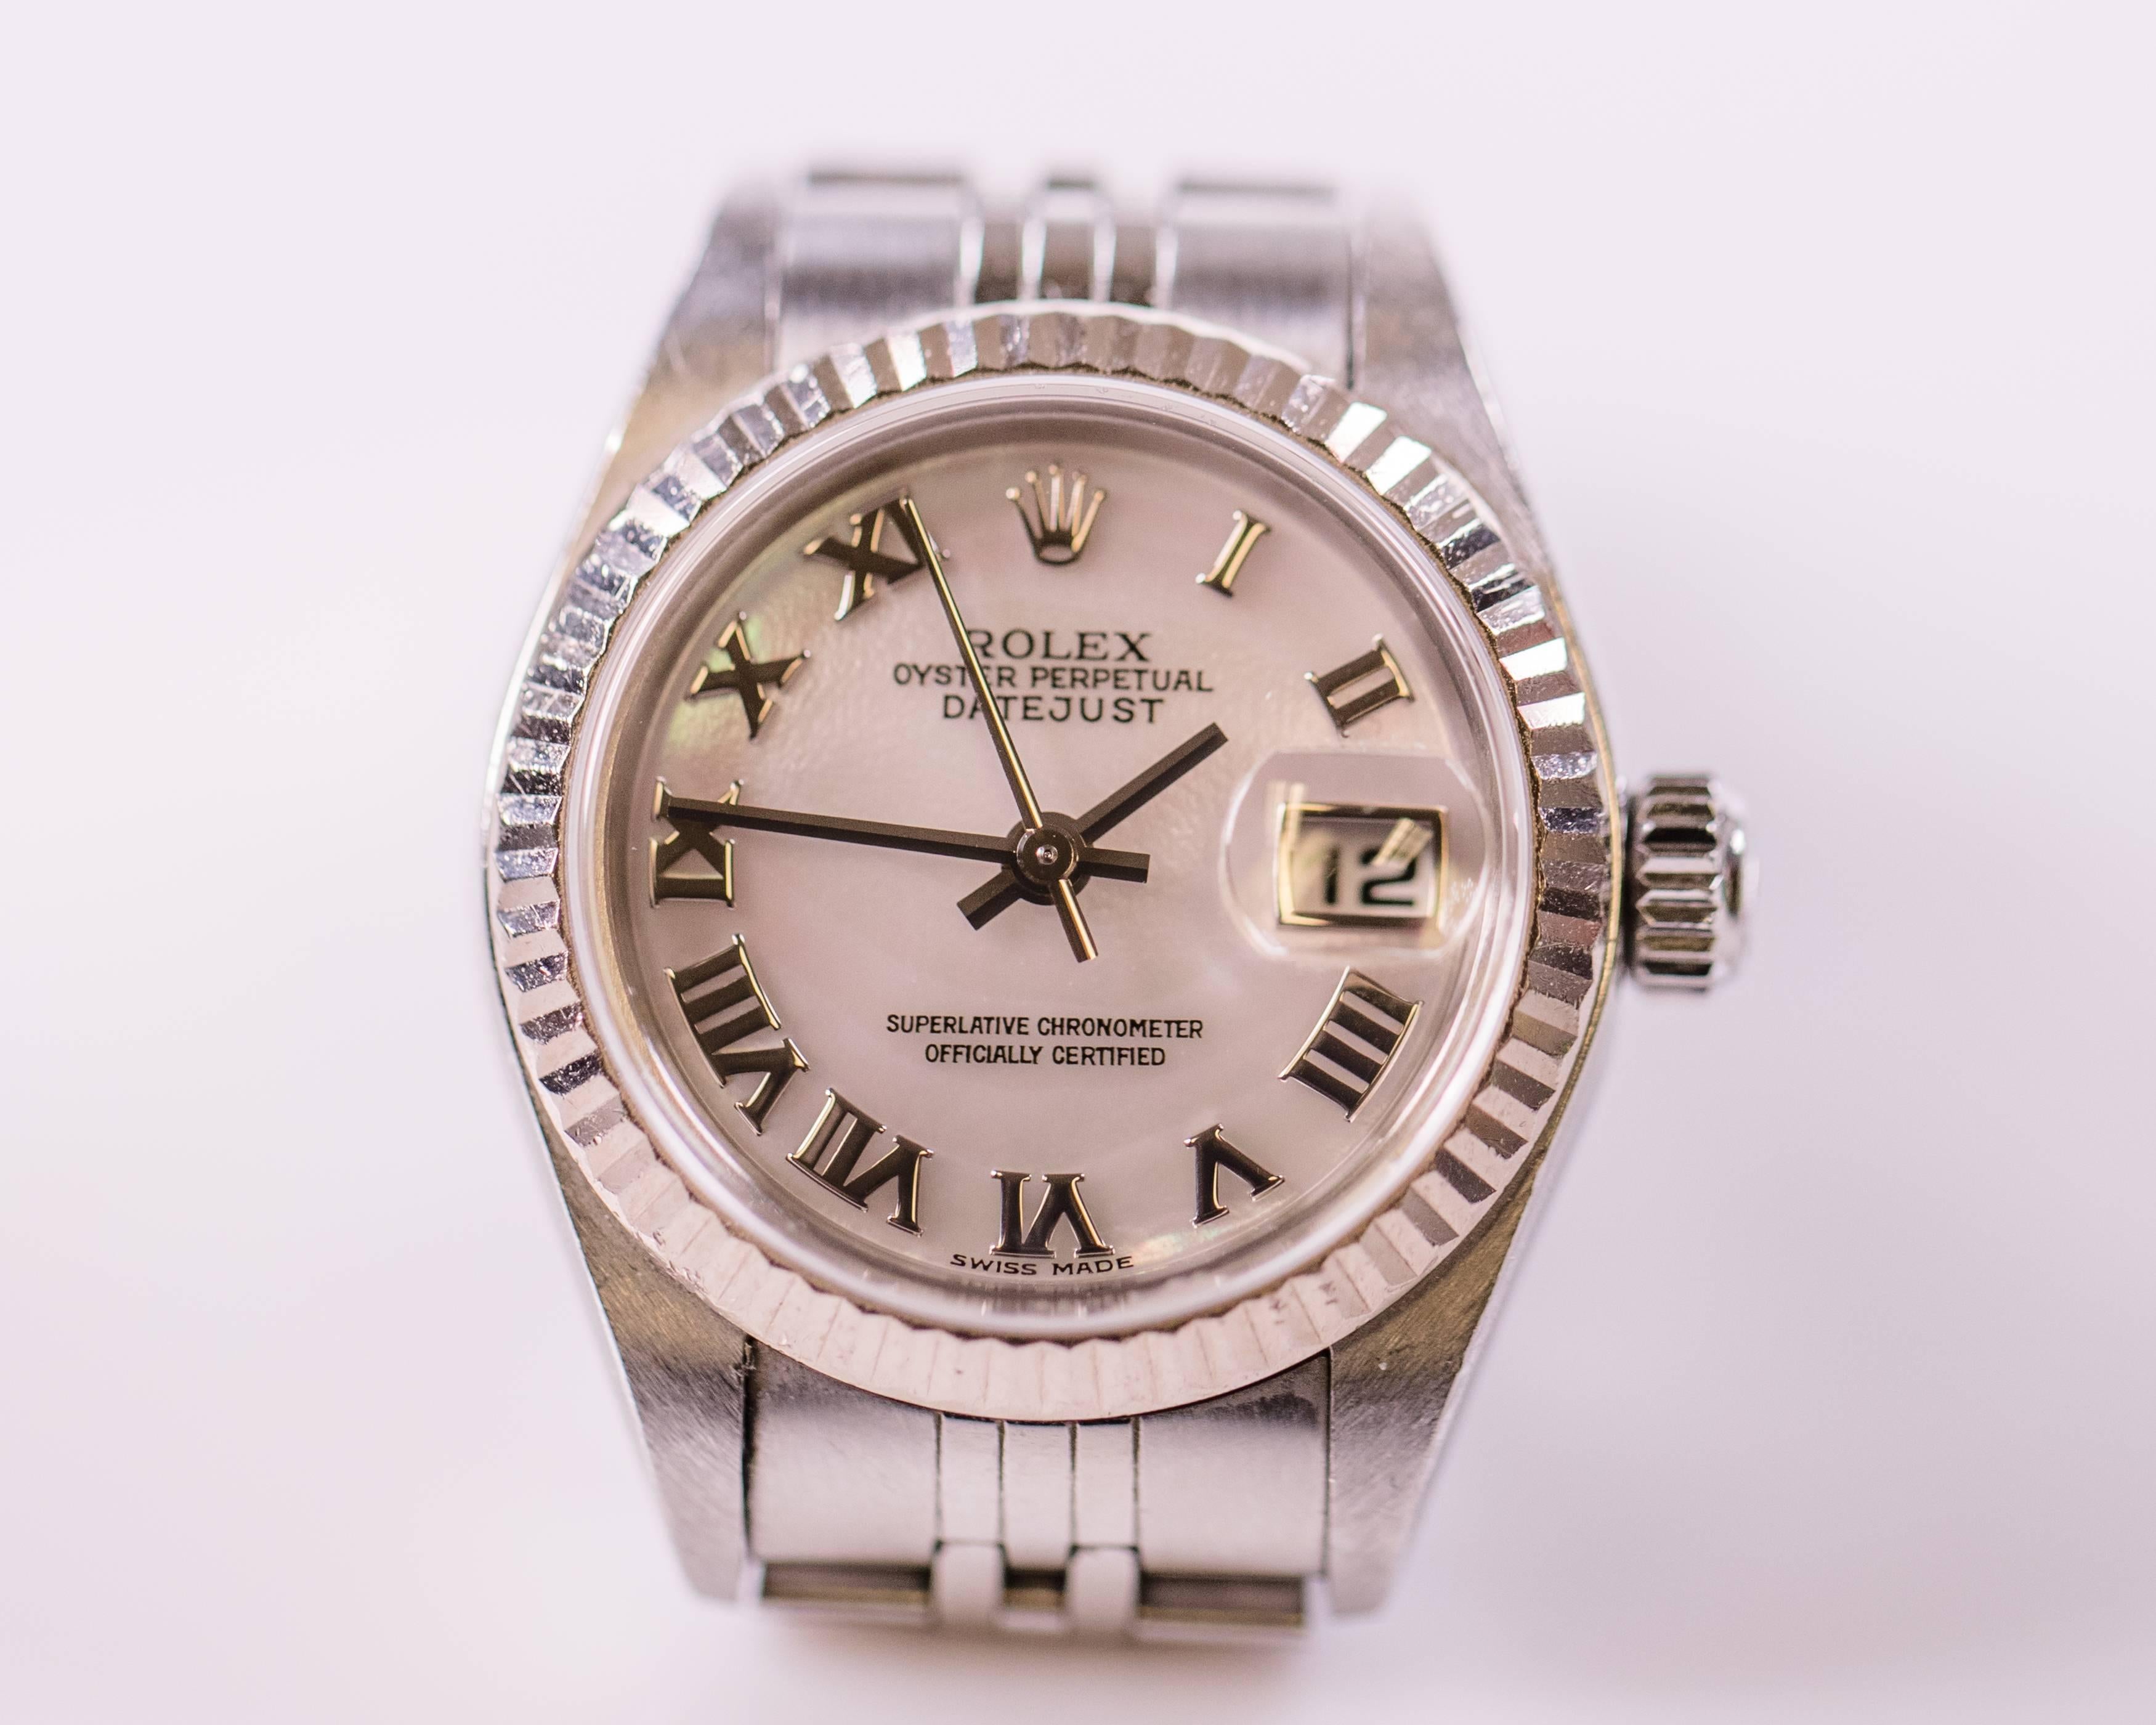 Rolex created this Elegant 18 Karat White Gold and Stainless Steel Ladies Chronometer Watch with Classic styling!
Features: 
-a Rose Mother of Pearl Dial
-Rhodium Roman Numeral Hour Markers and Stick Hands
-Date Window at the 3:00